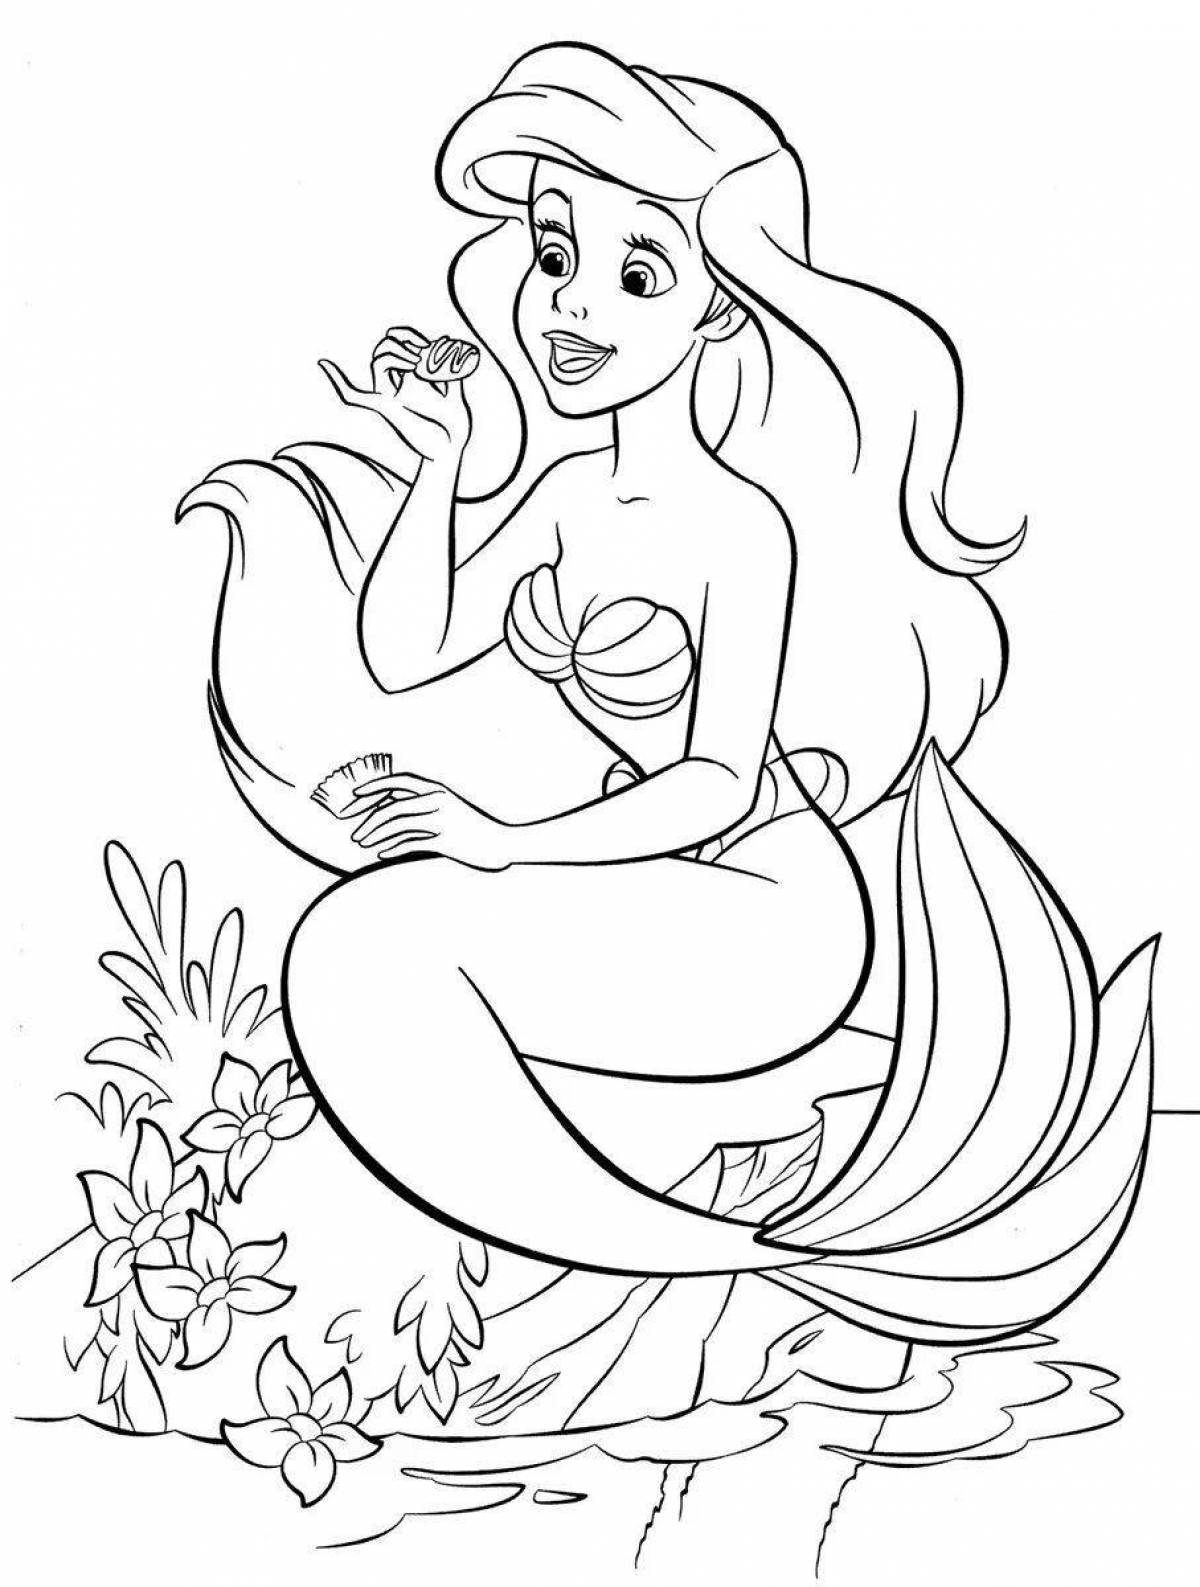 Coloring page gorgeous little mermaid